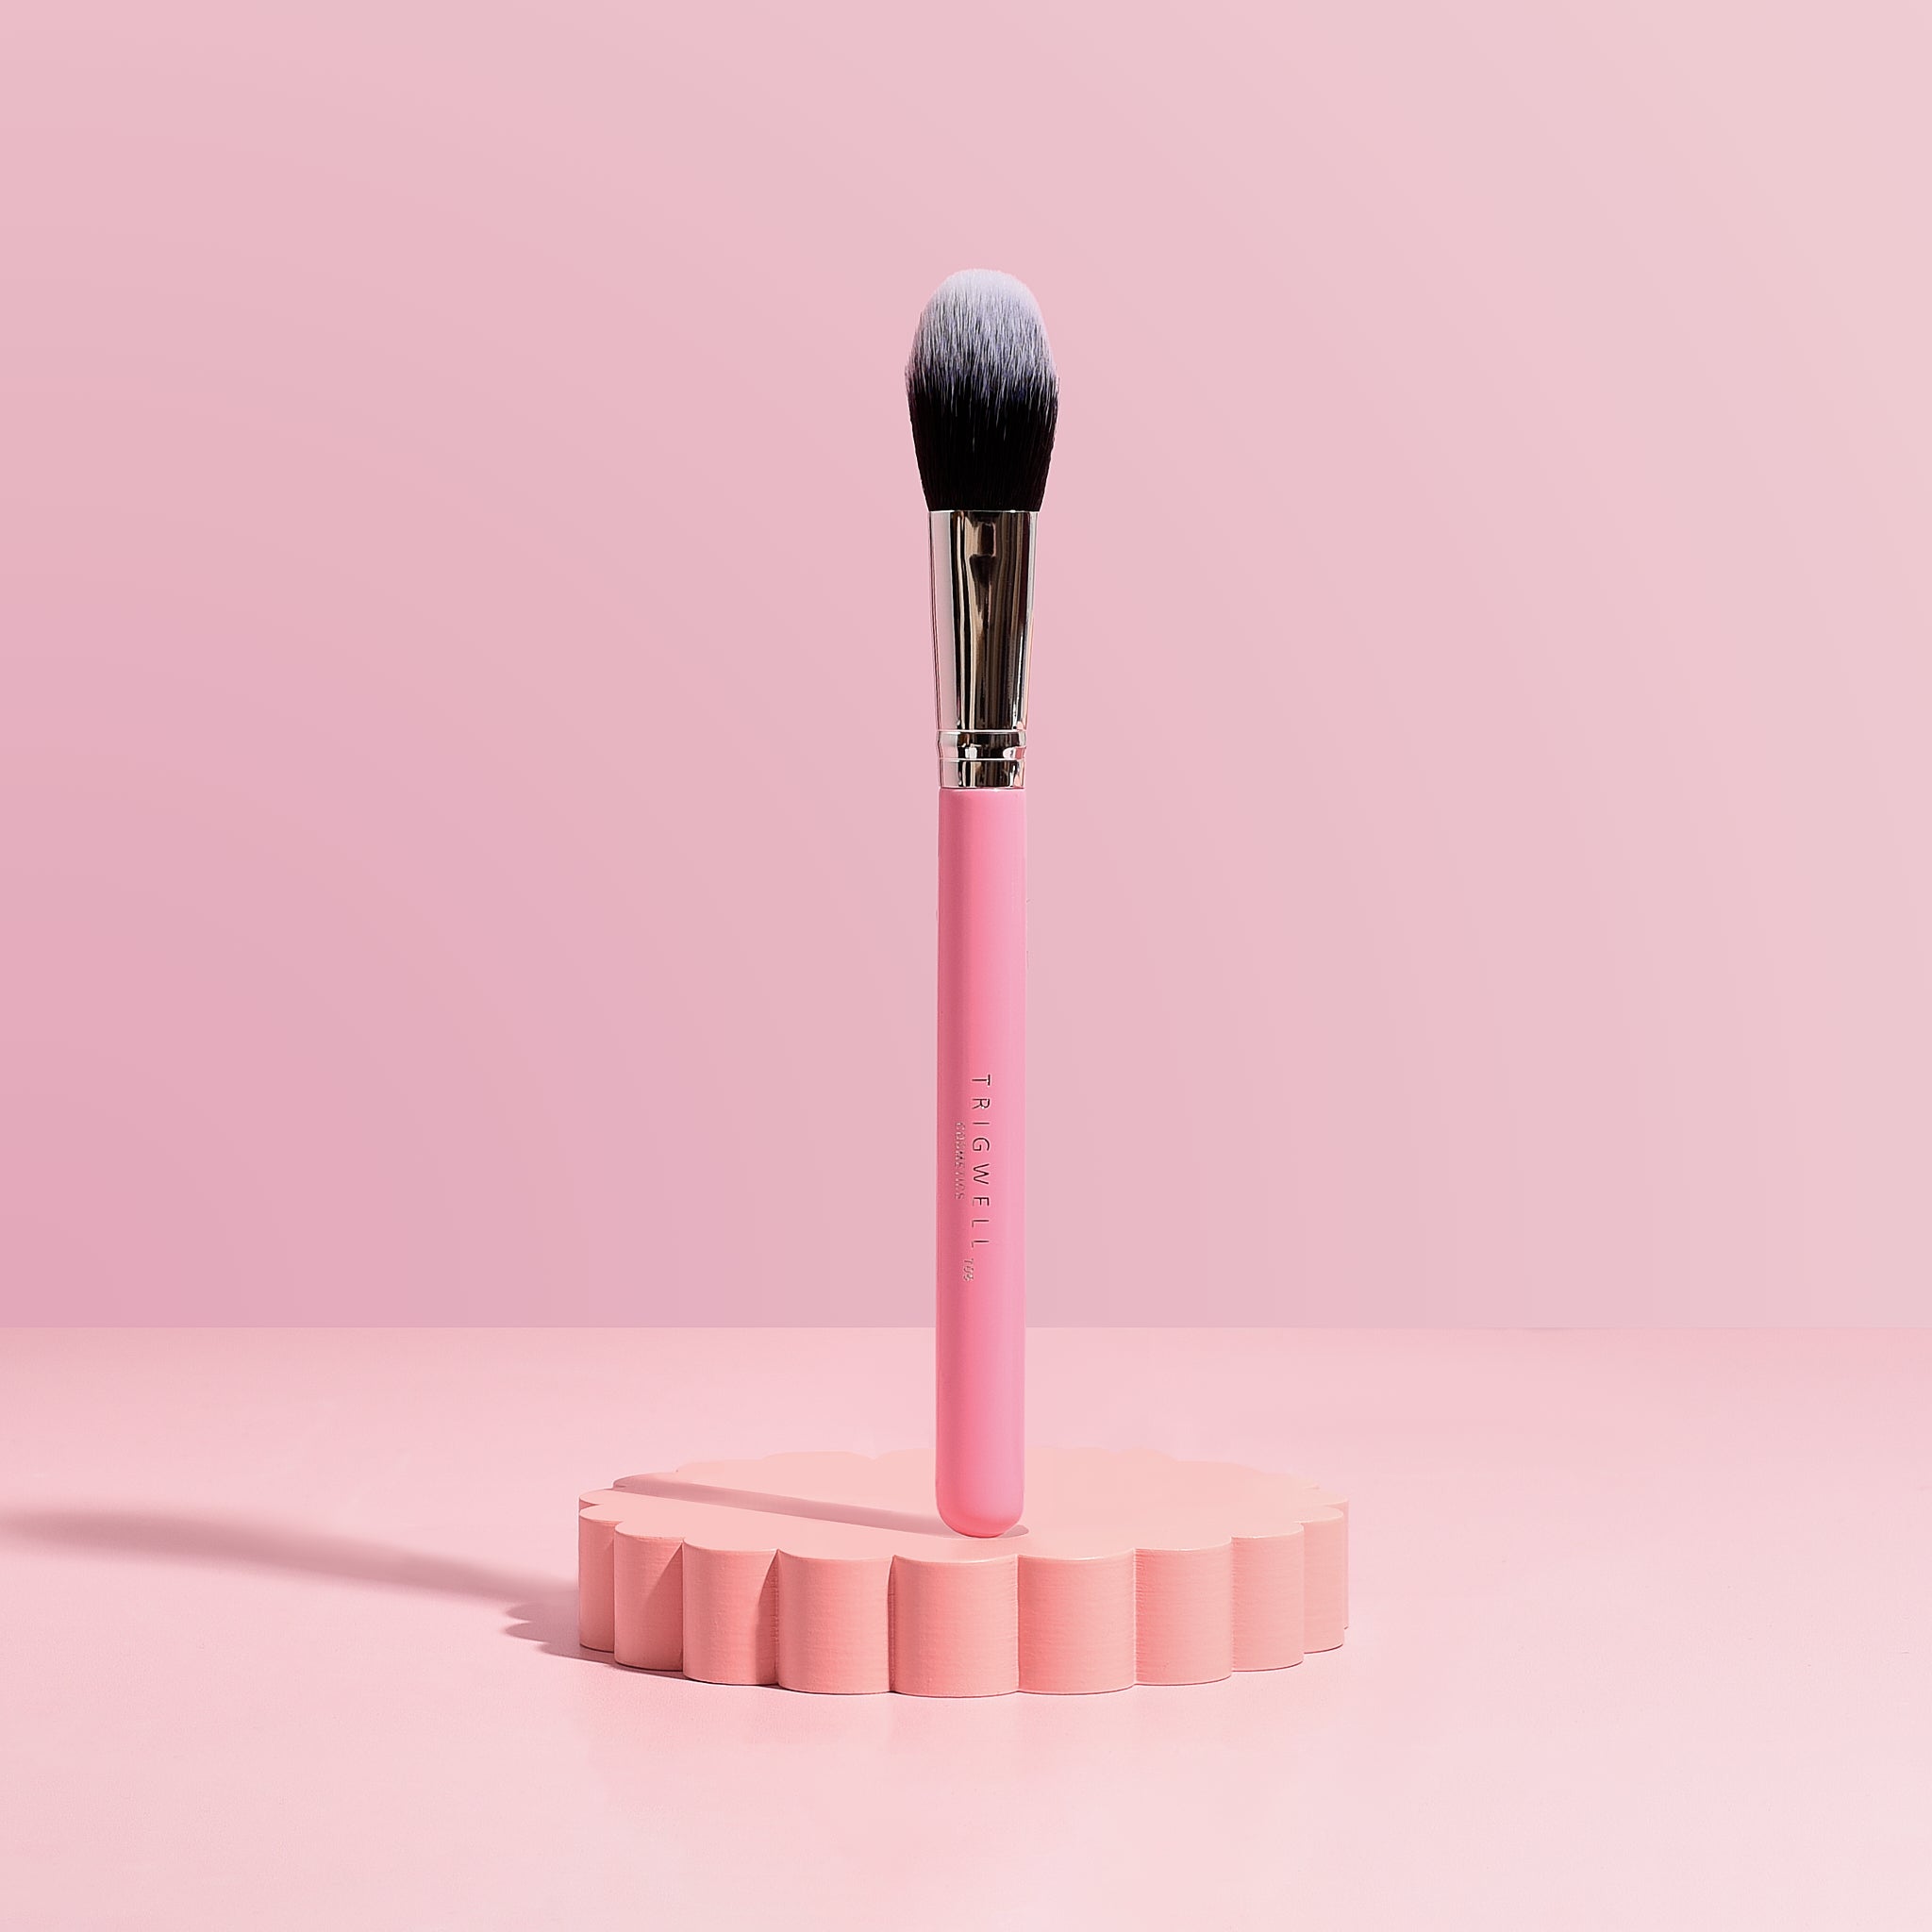 Image of T06 brush - a medium fluffy brush which works well with both powder and cream application